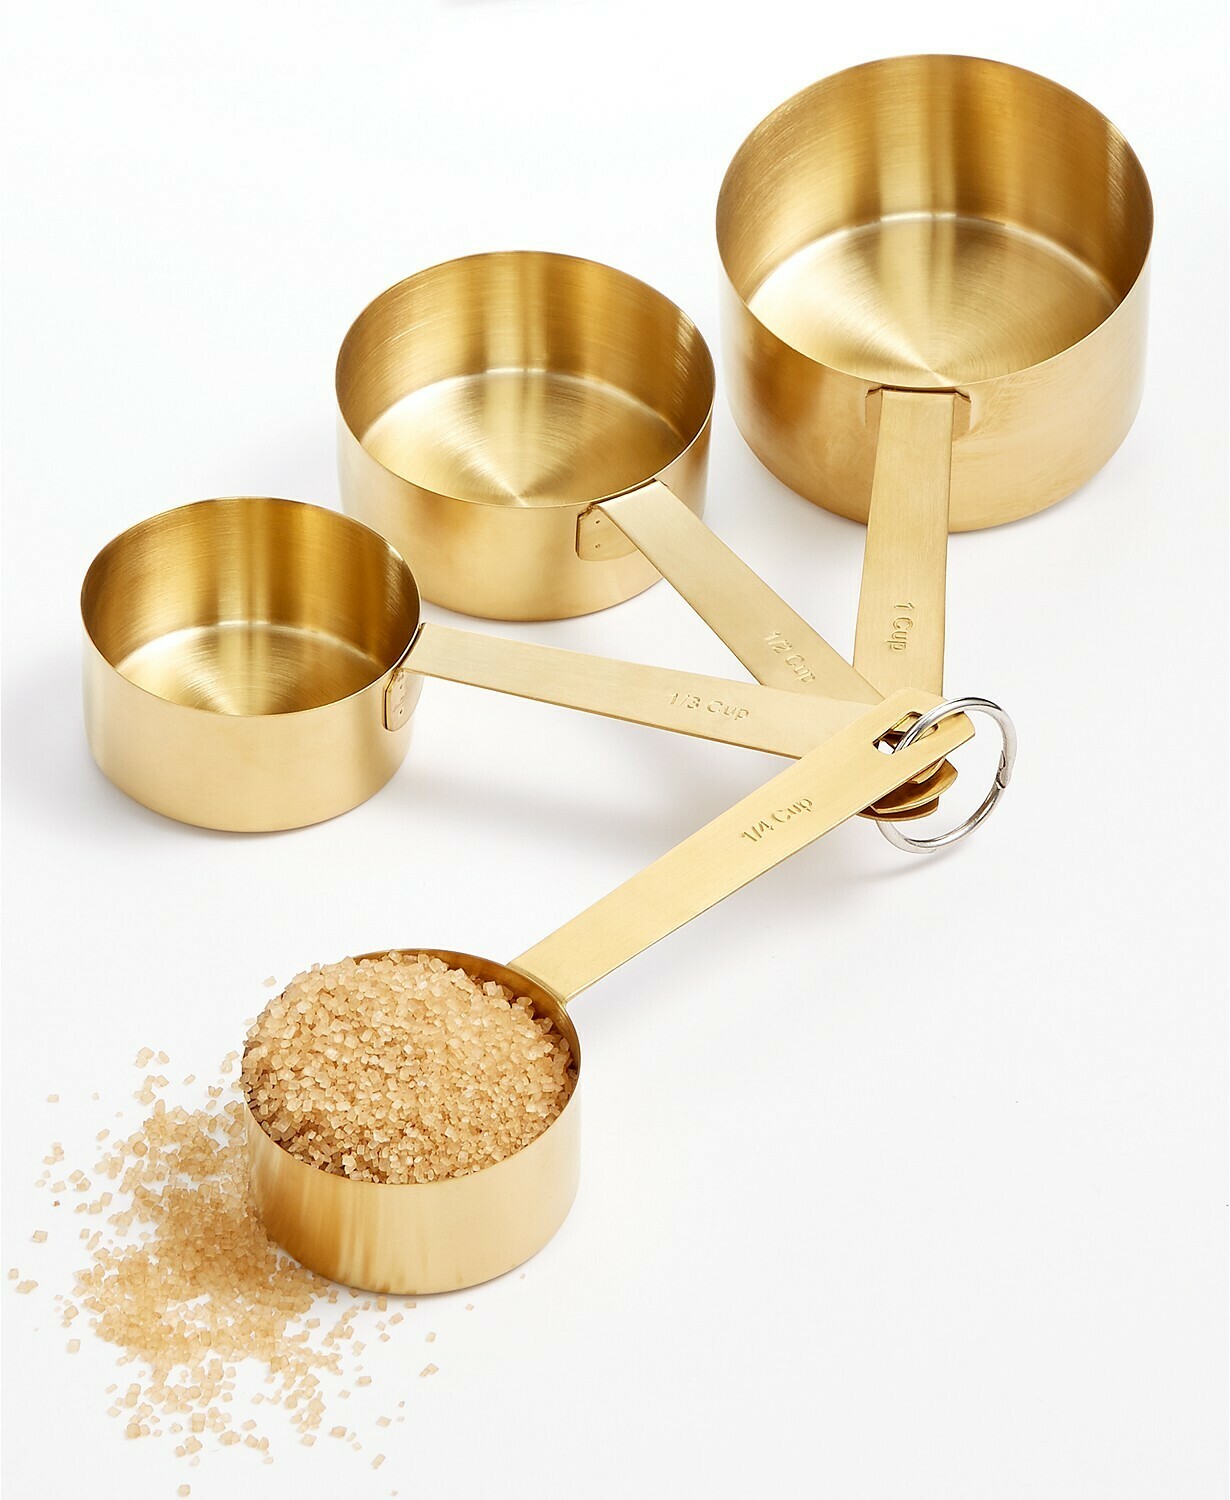 Martha Stewart Collection Harvest Gold-Tone Measuring Cups, Set of 4